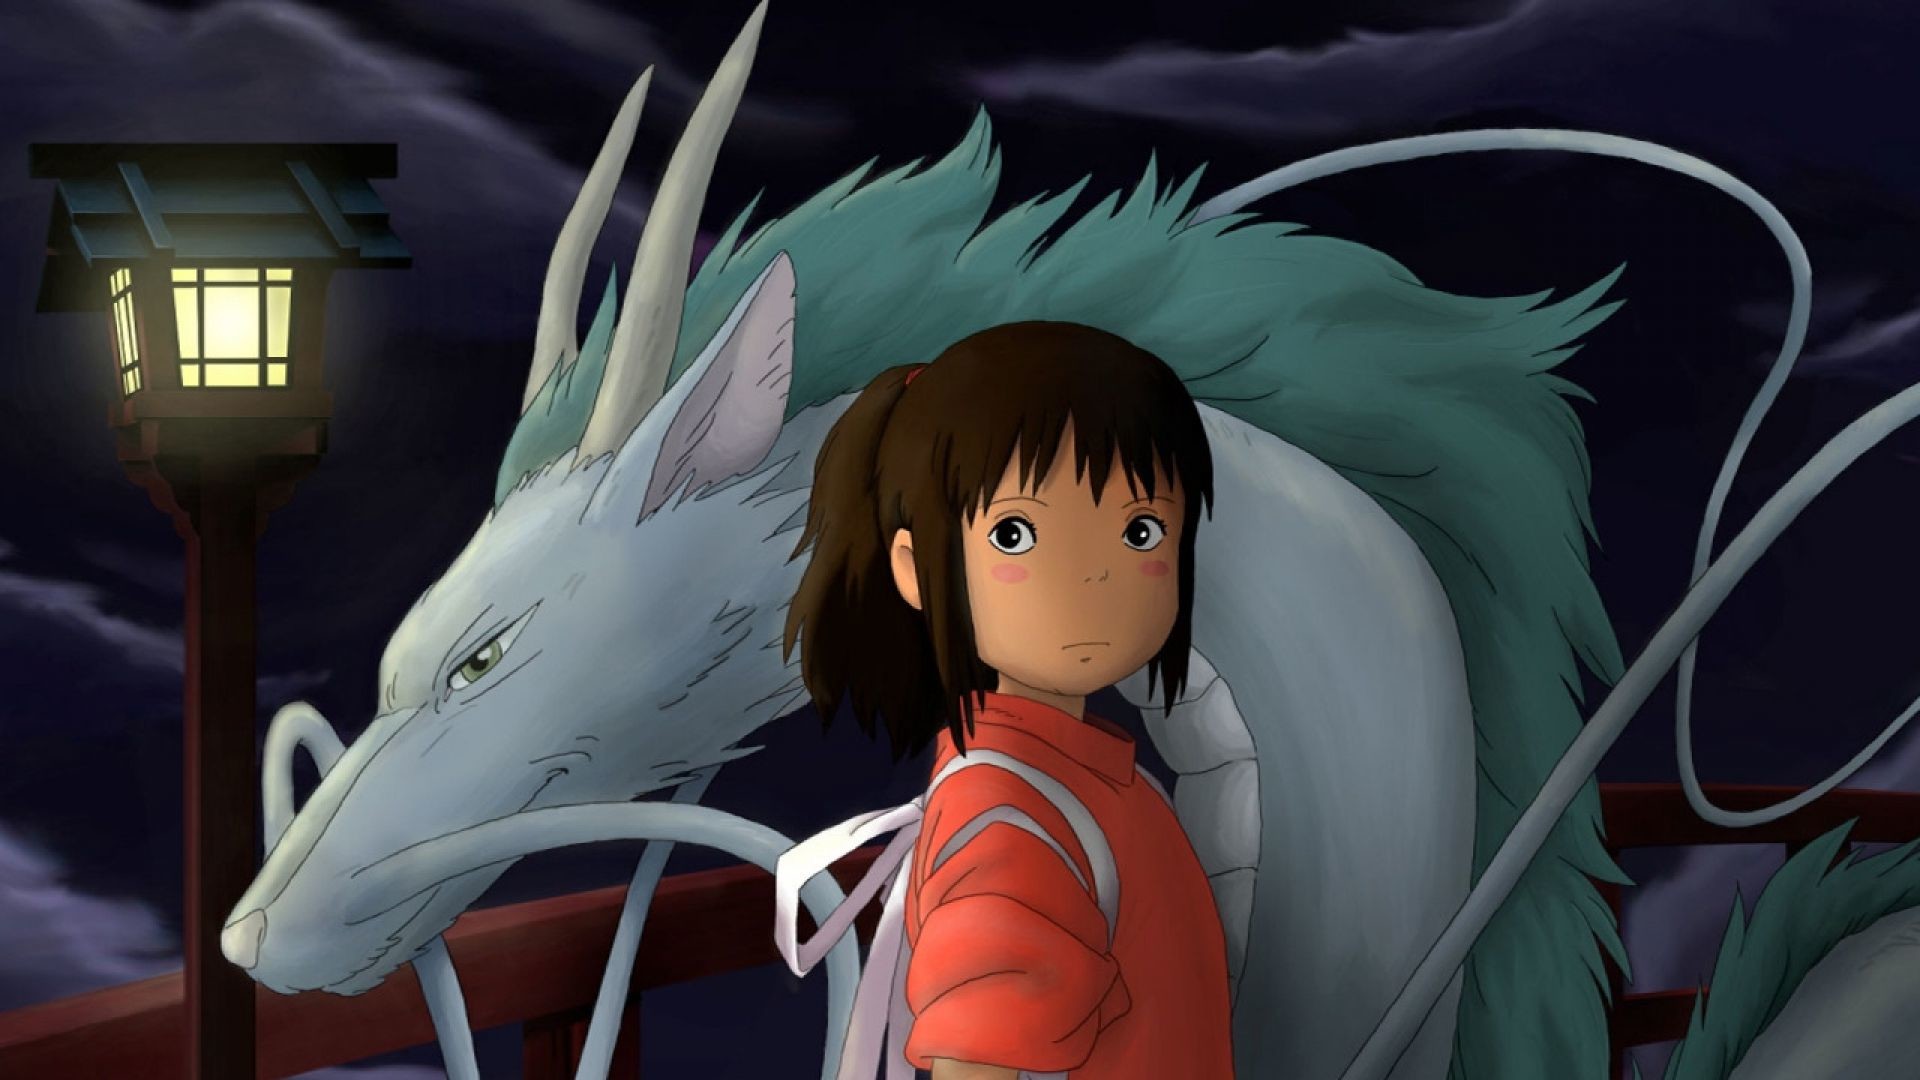 1920x1080 Spirited Away Film Cartoon Pictures For iMac – Cartoons Wallpapers